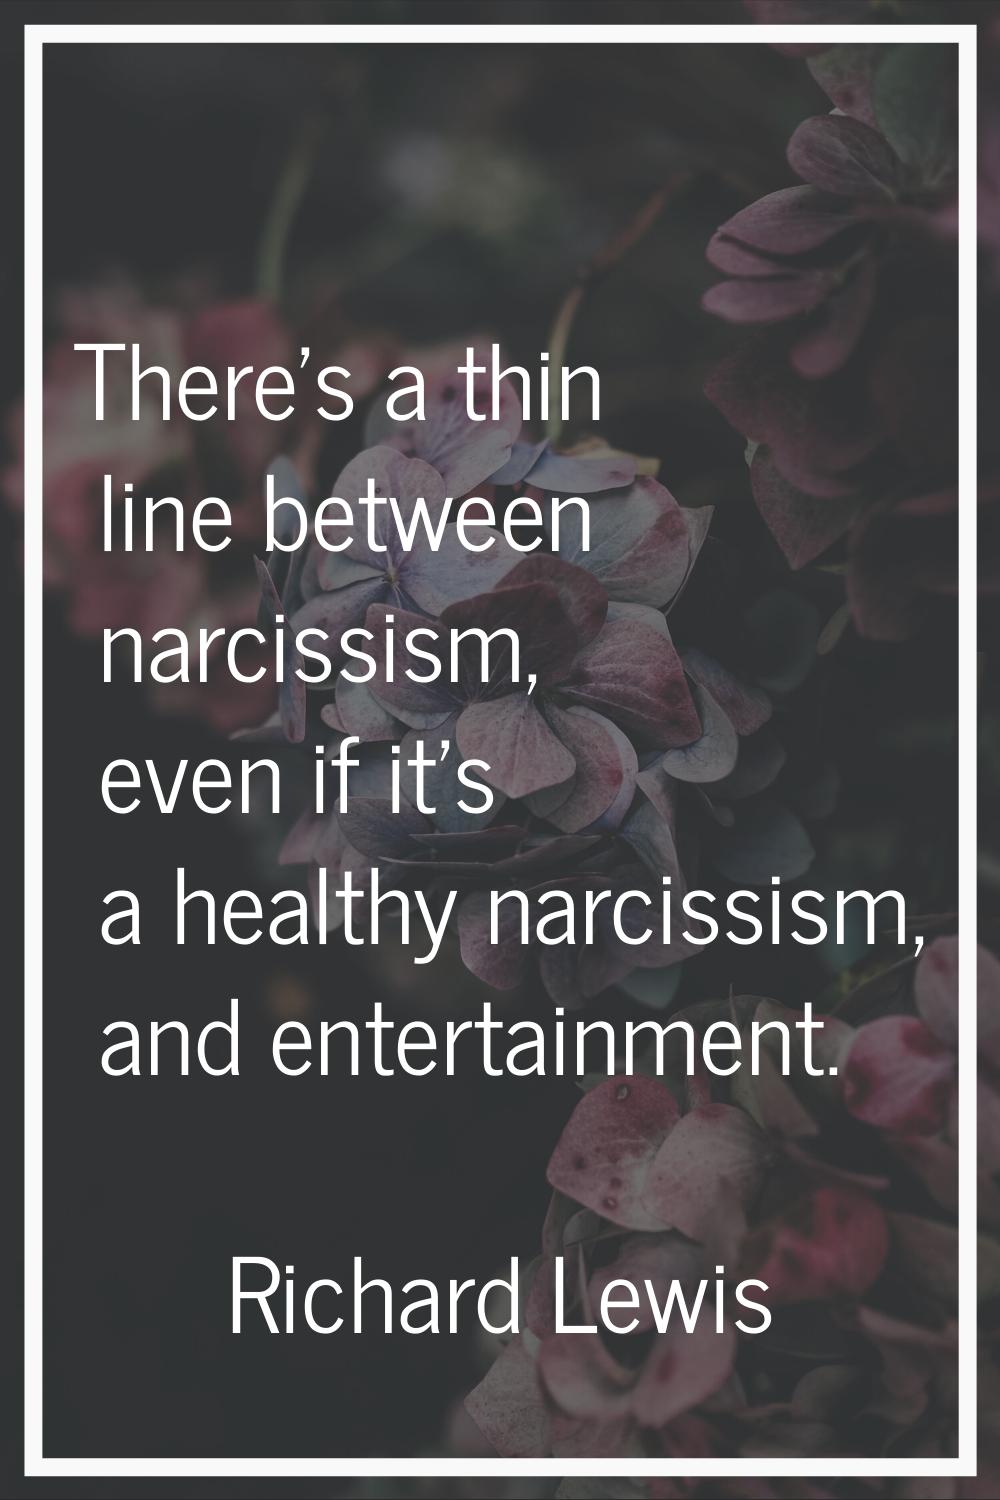 There's a thin line between narcissism, even if it's a healthy narcissism, and entertainment.